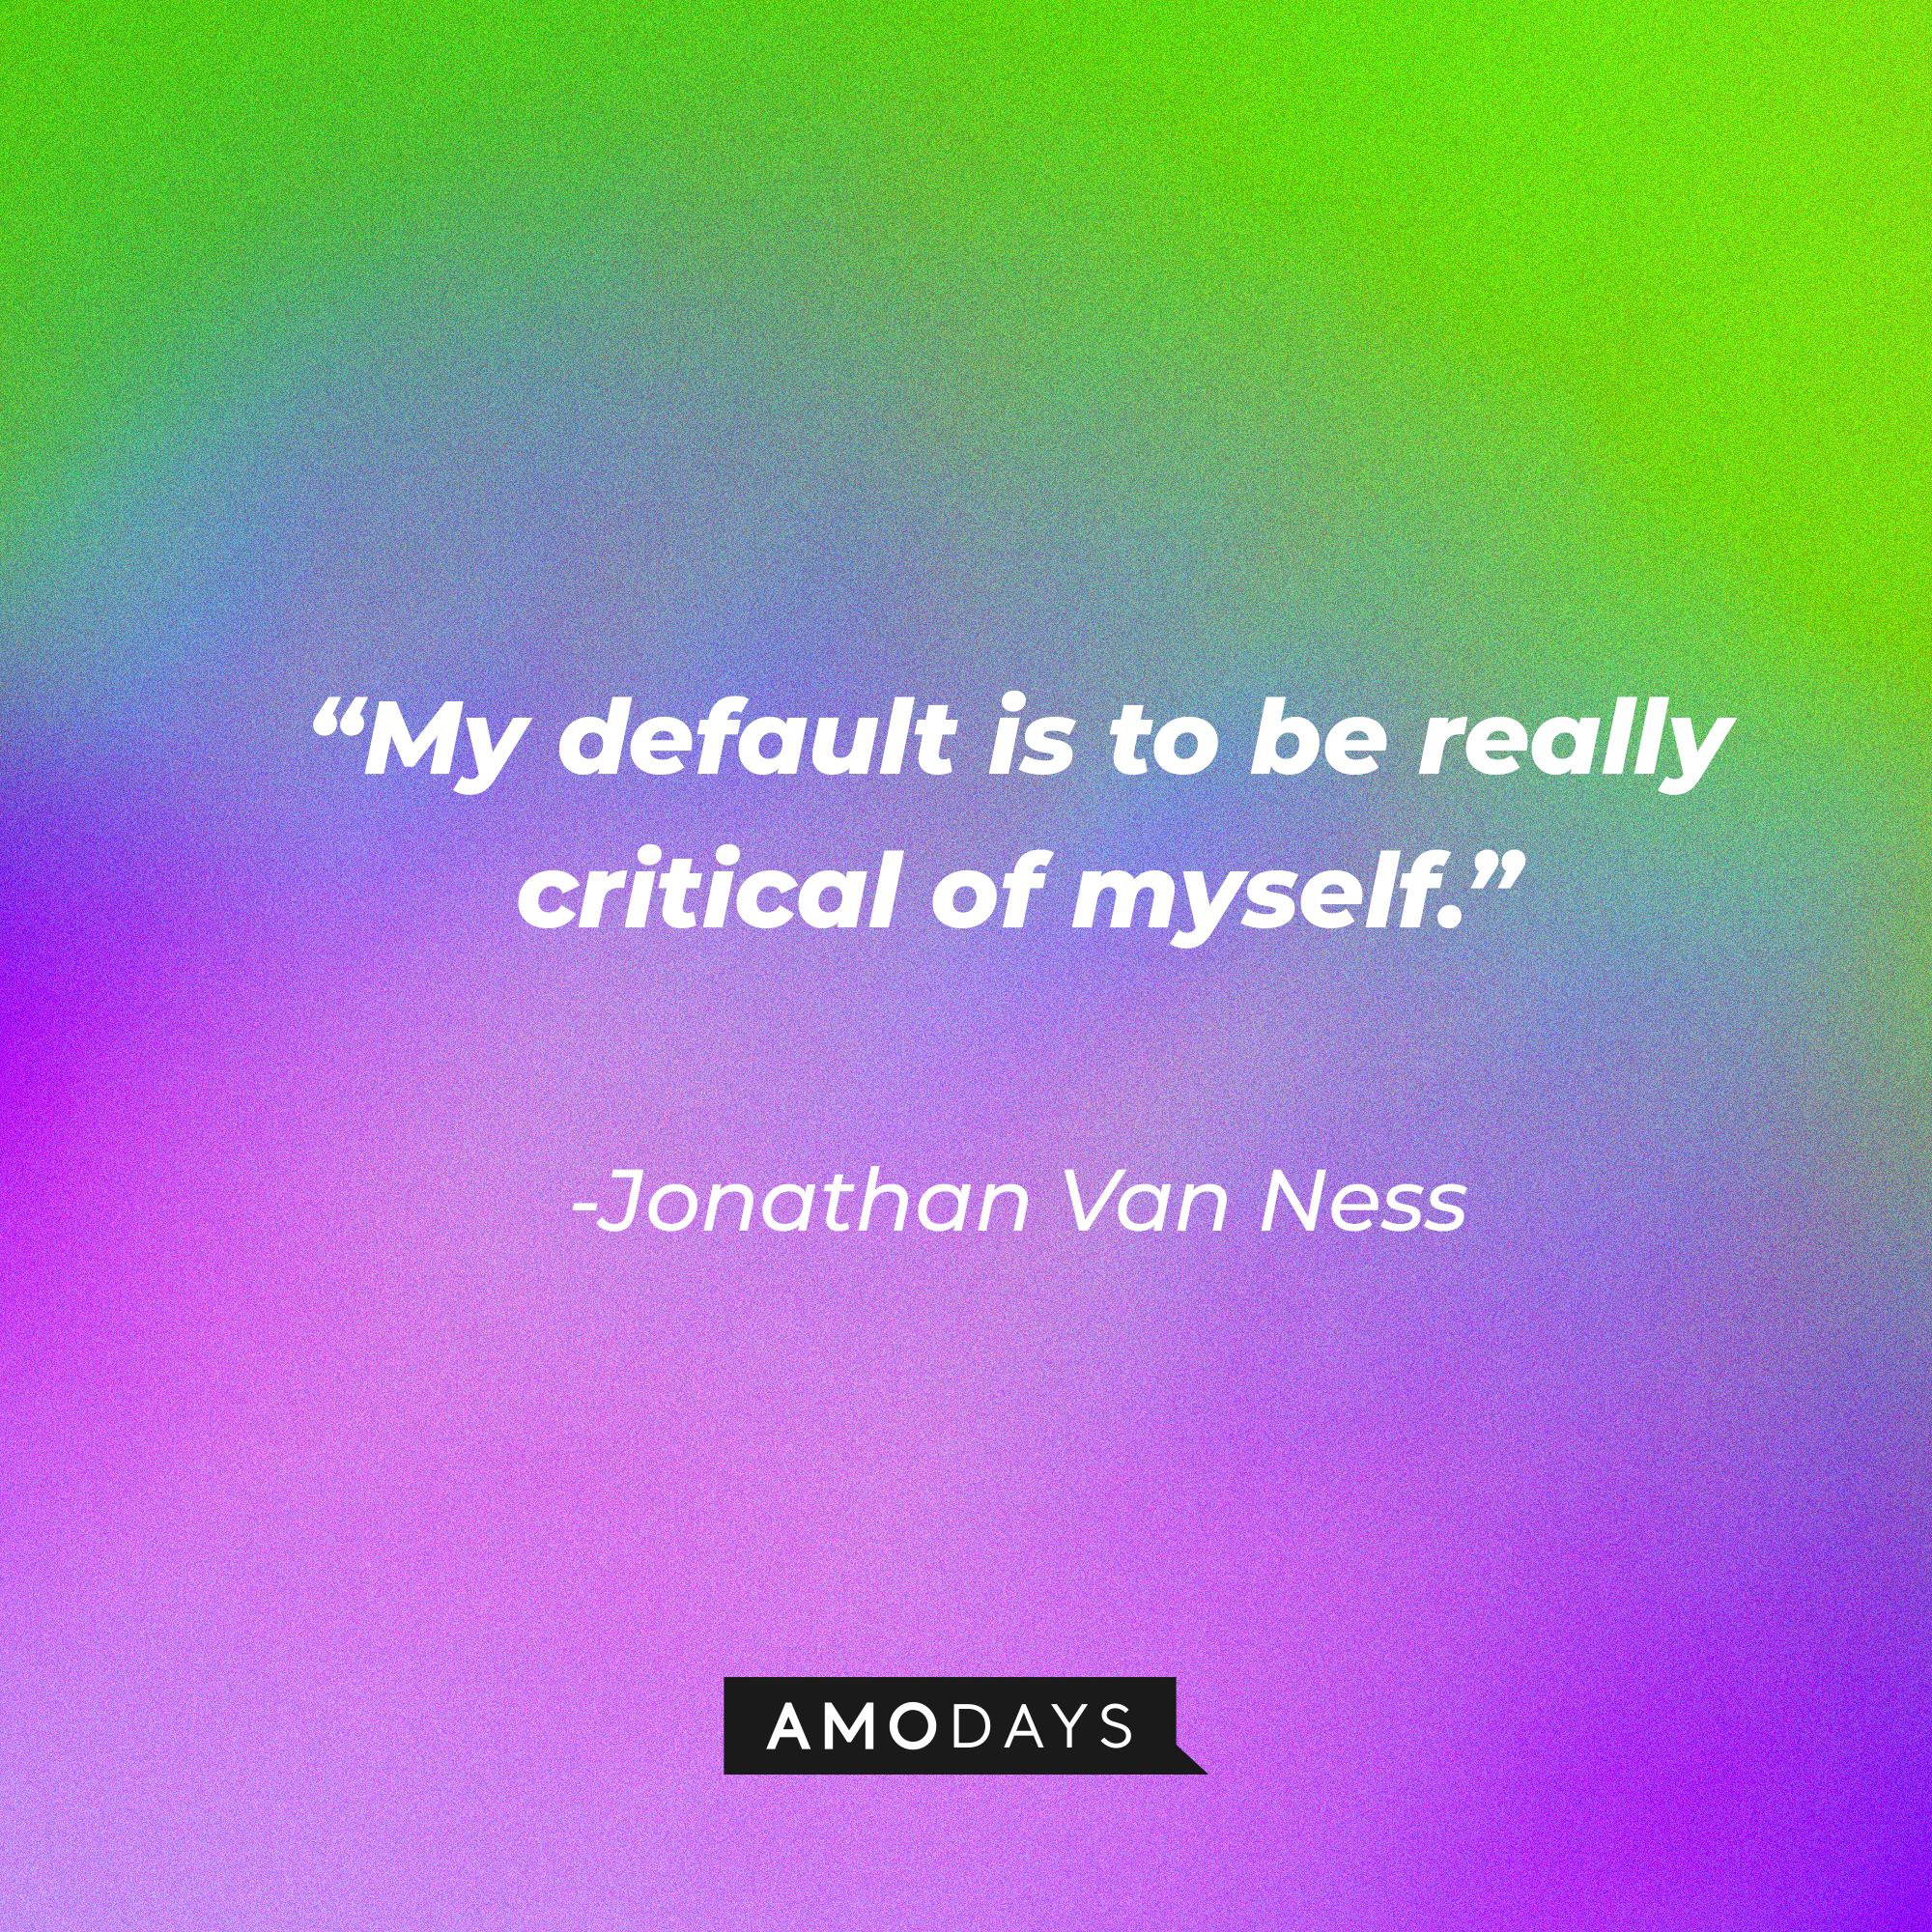 Jonathan Van Ness’s quote: “My default is to be really critical of myself.” | Source: AmoDays